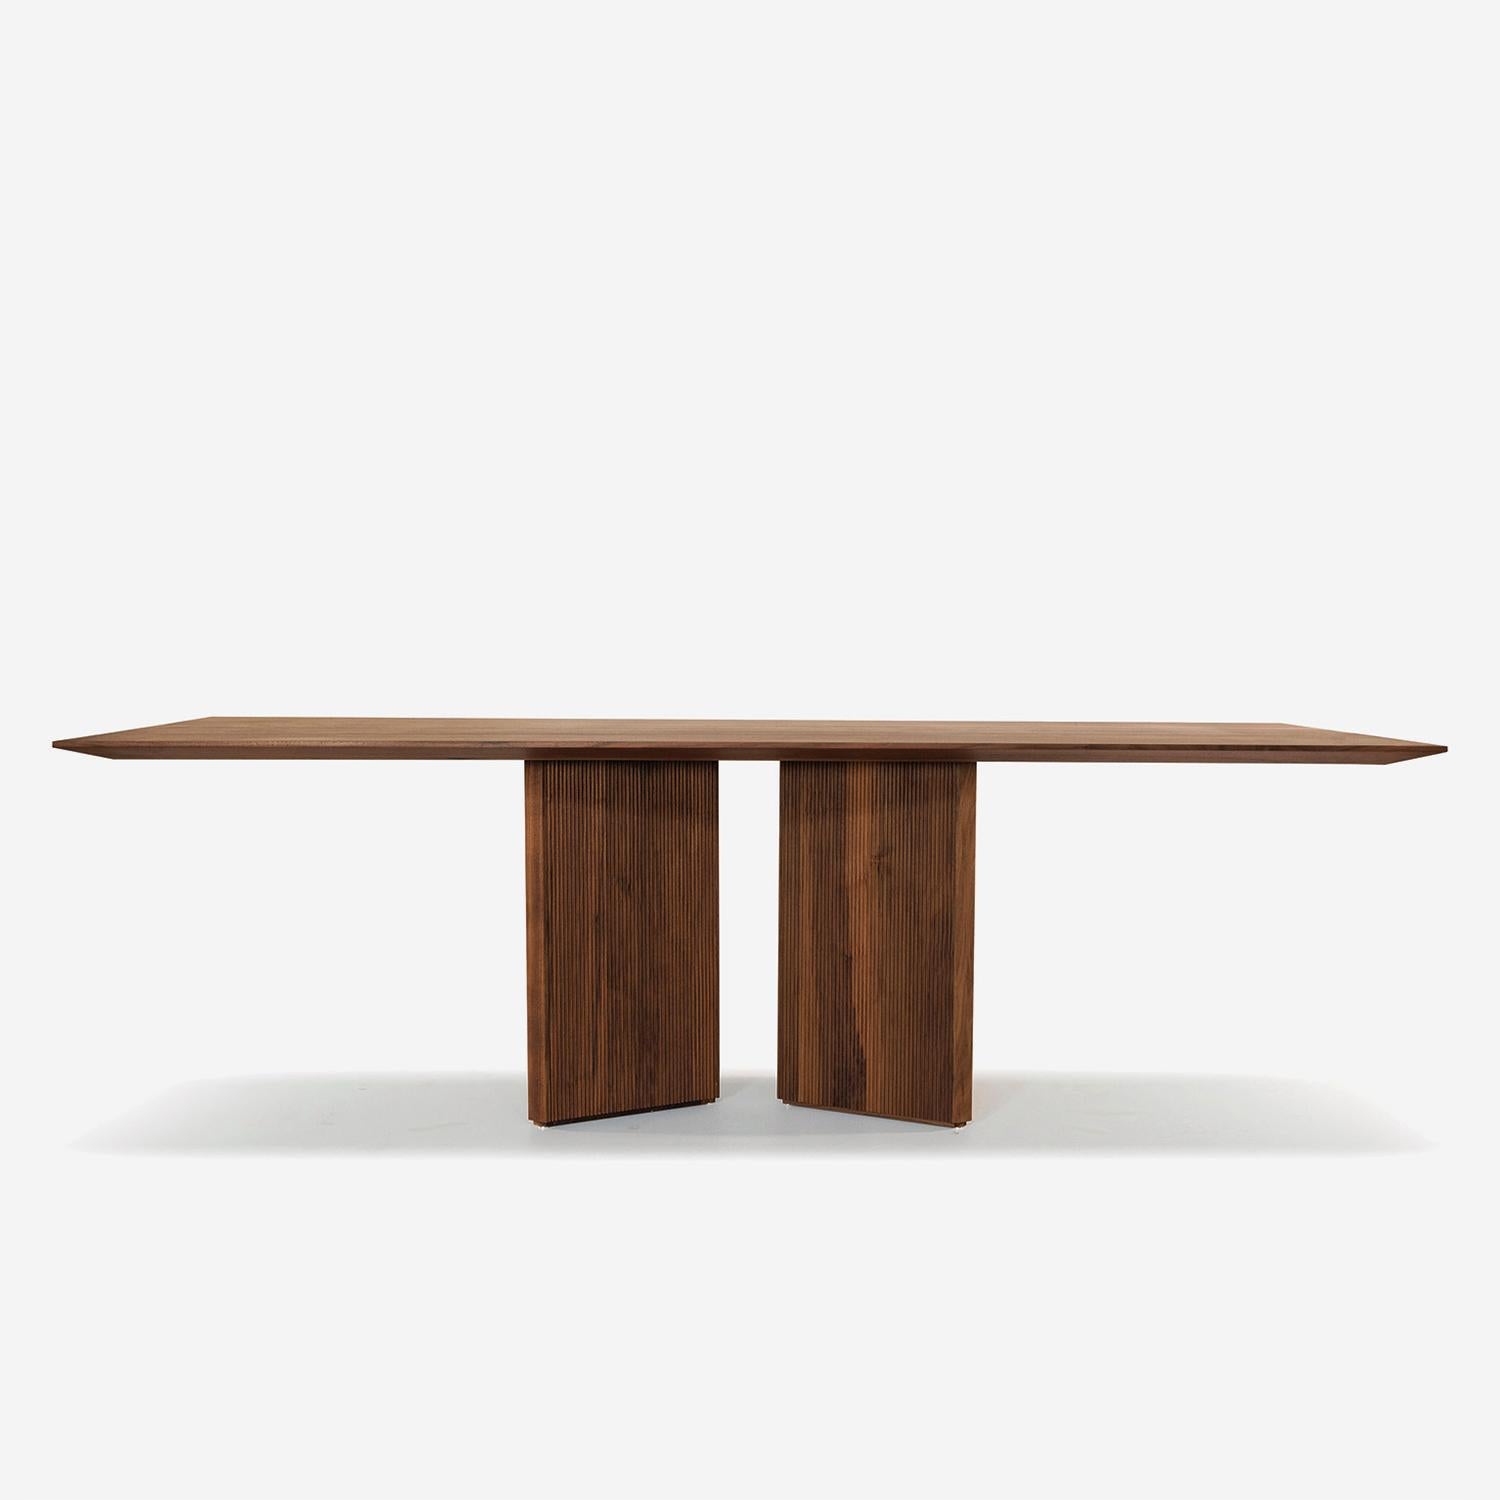 Dining table Bergame lines all in solid walnut wood,
with prism-shaped solid walnut wood base with vertical.
carved lines.
Also available in solid oak wood, on request.
Also available on request in:
L 200 x D 100 x H 75cm, price: 13900,00€
L